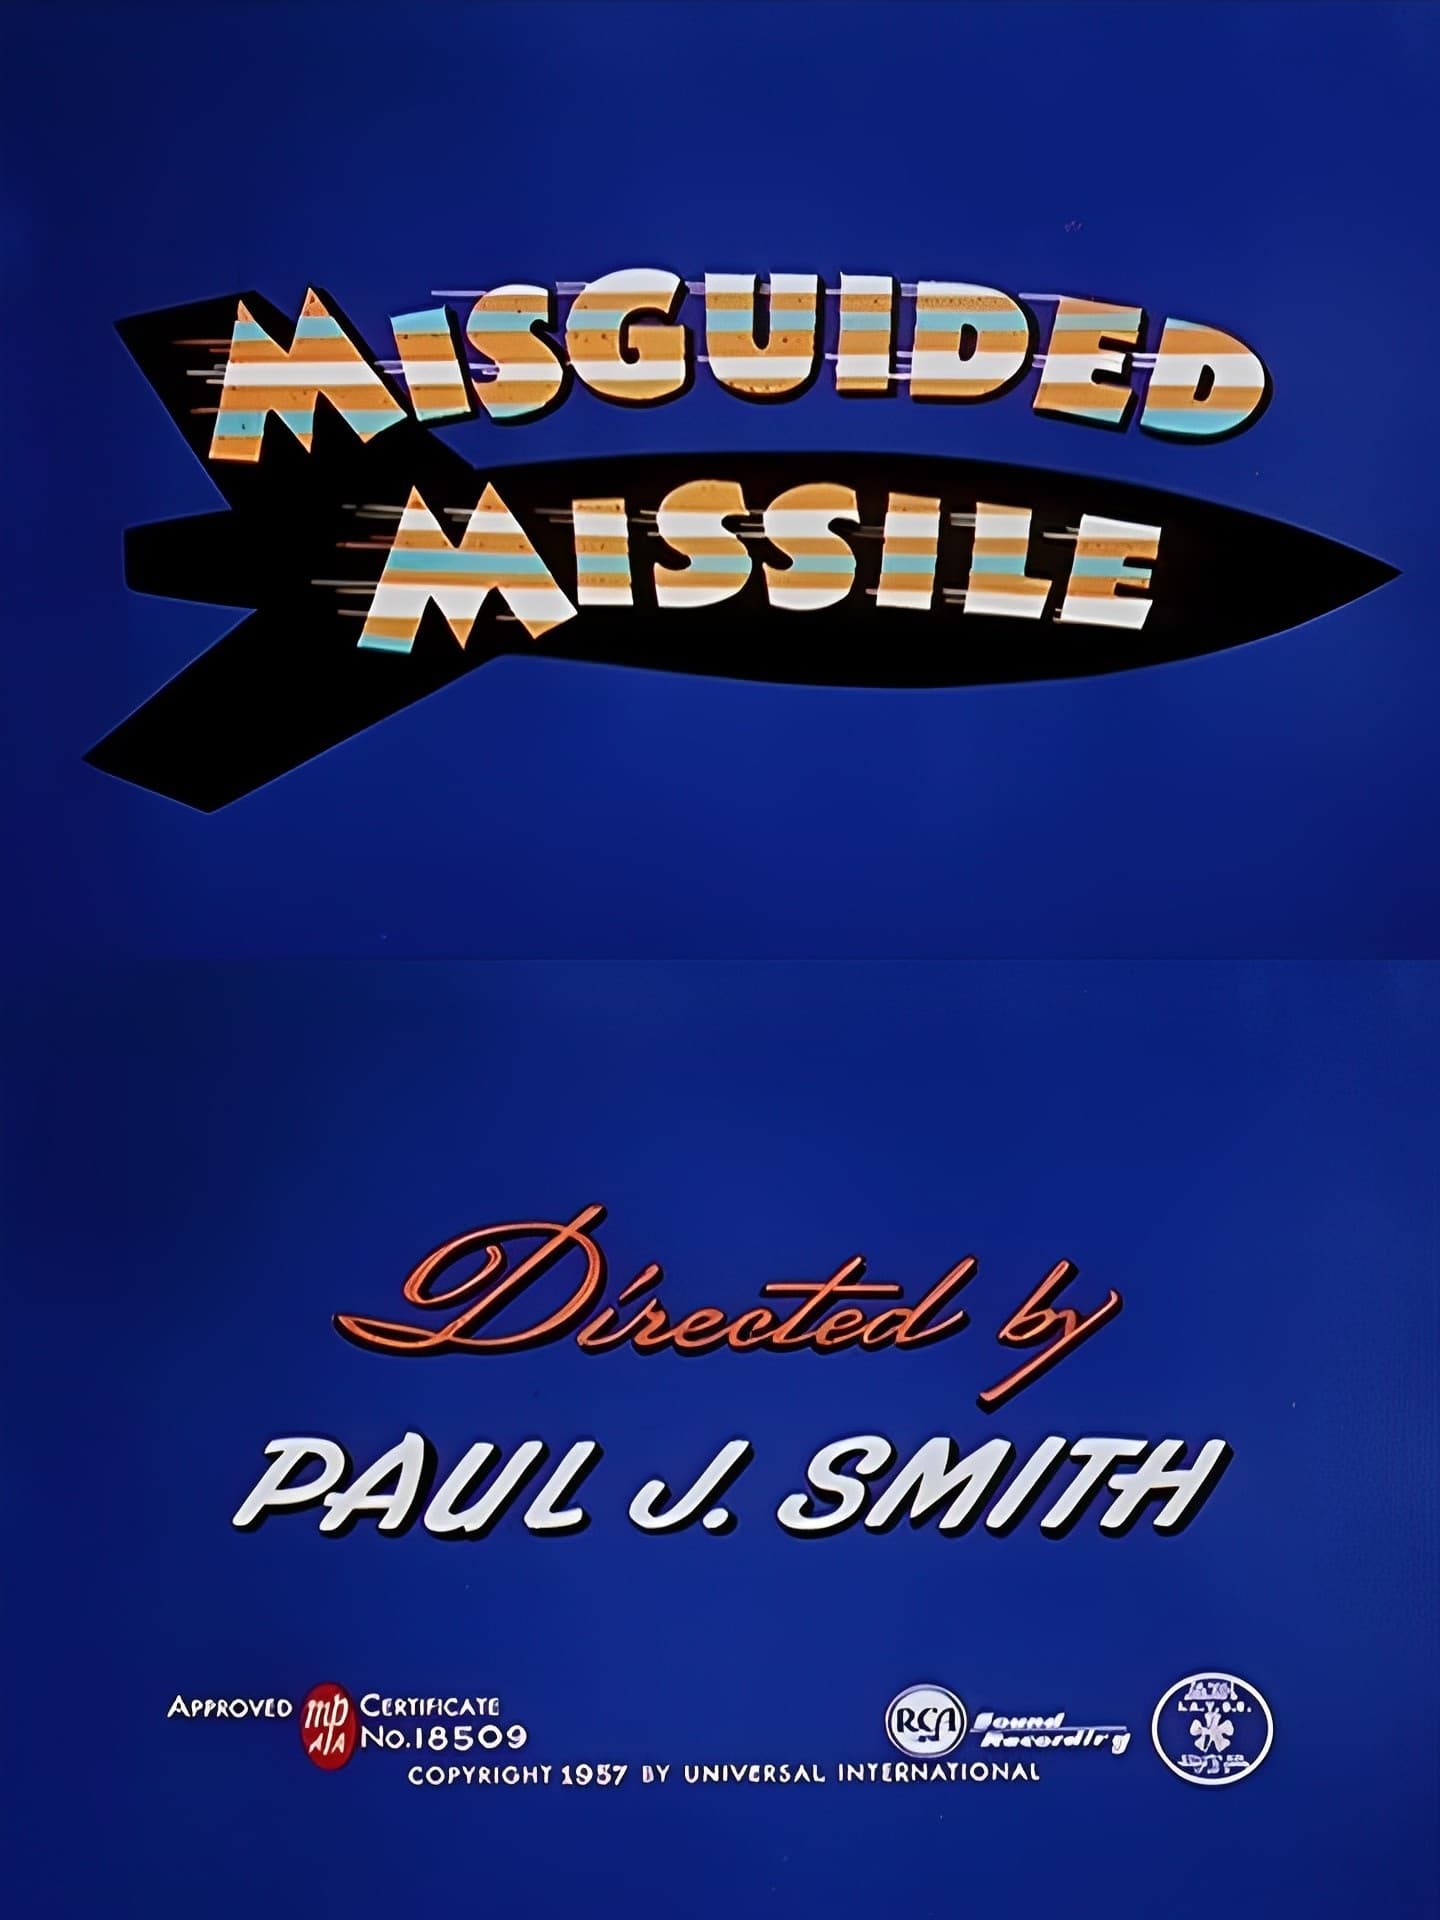 Misguided Missile (1958)